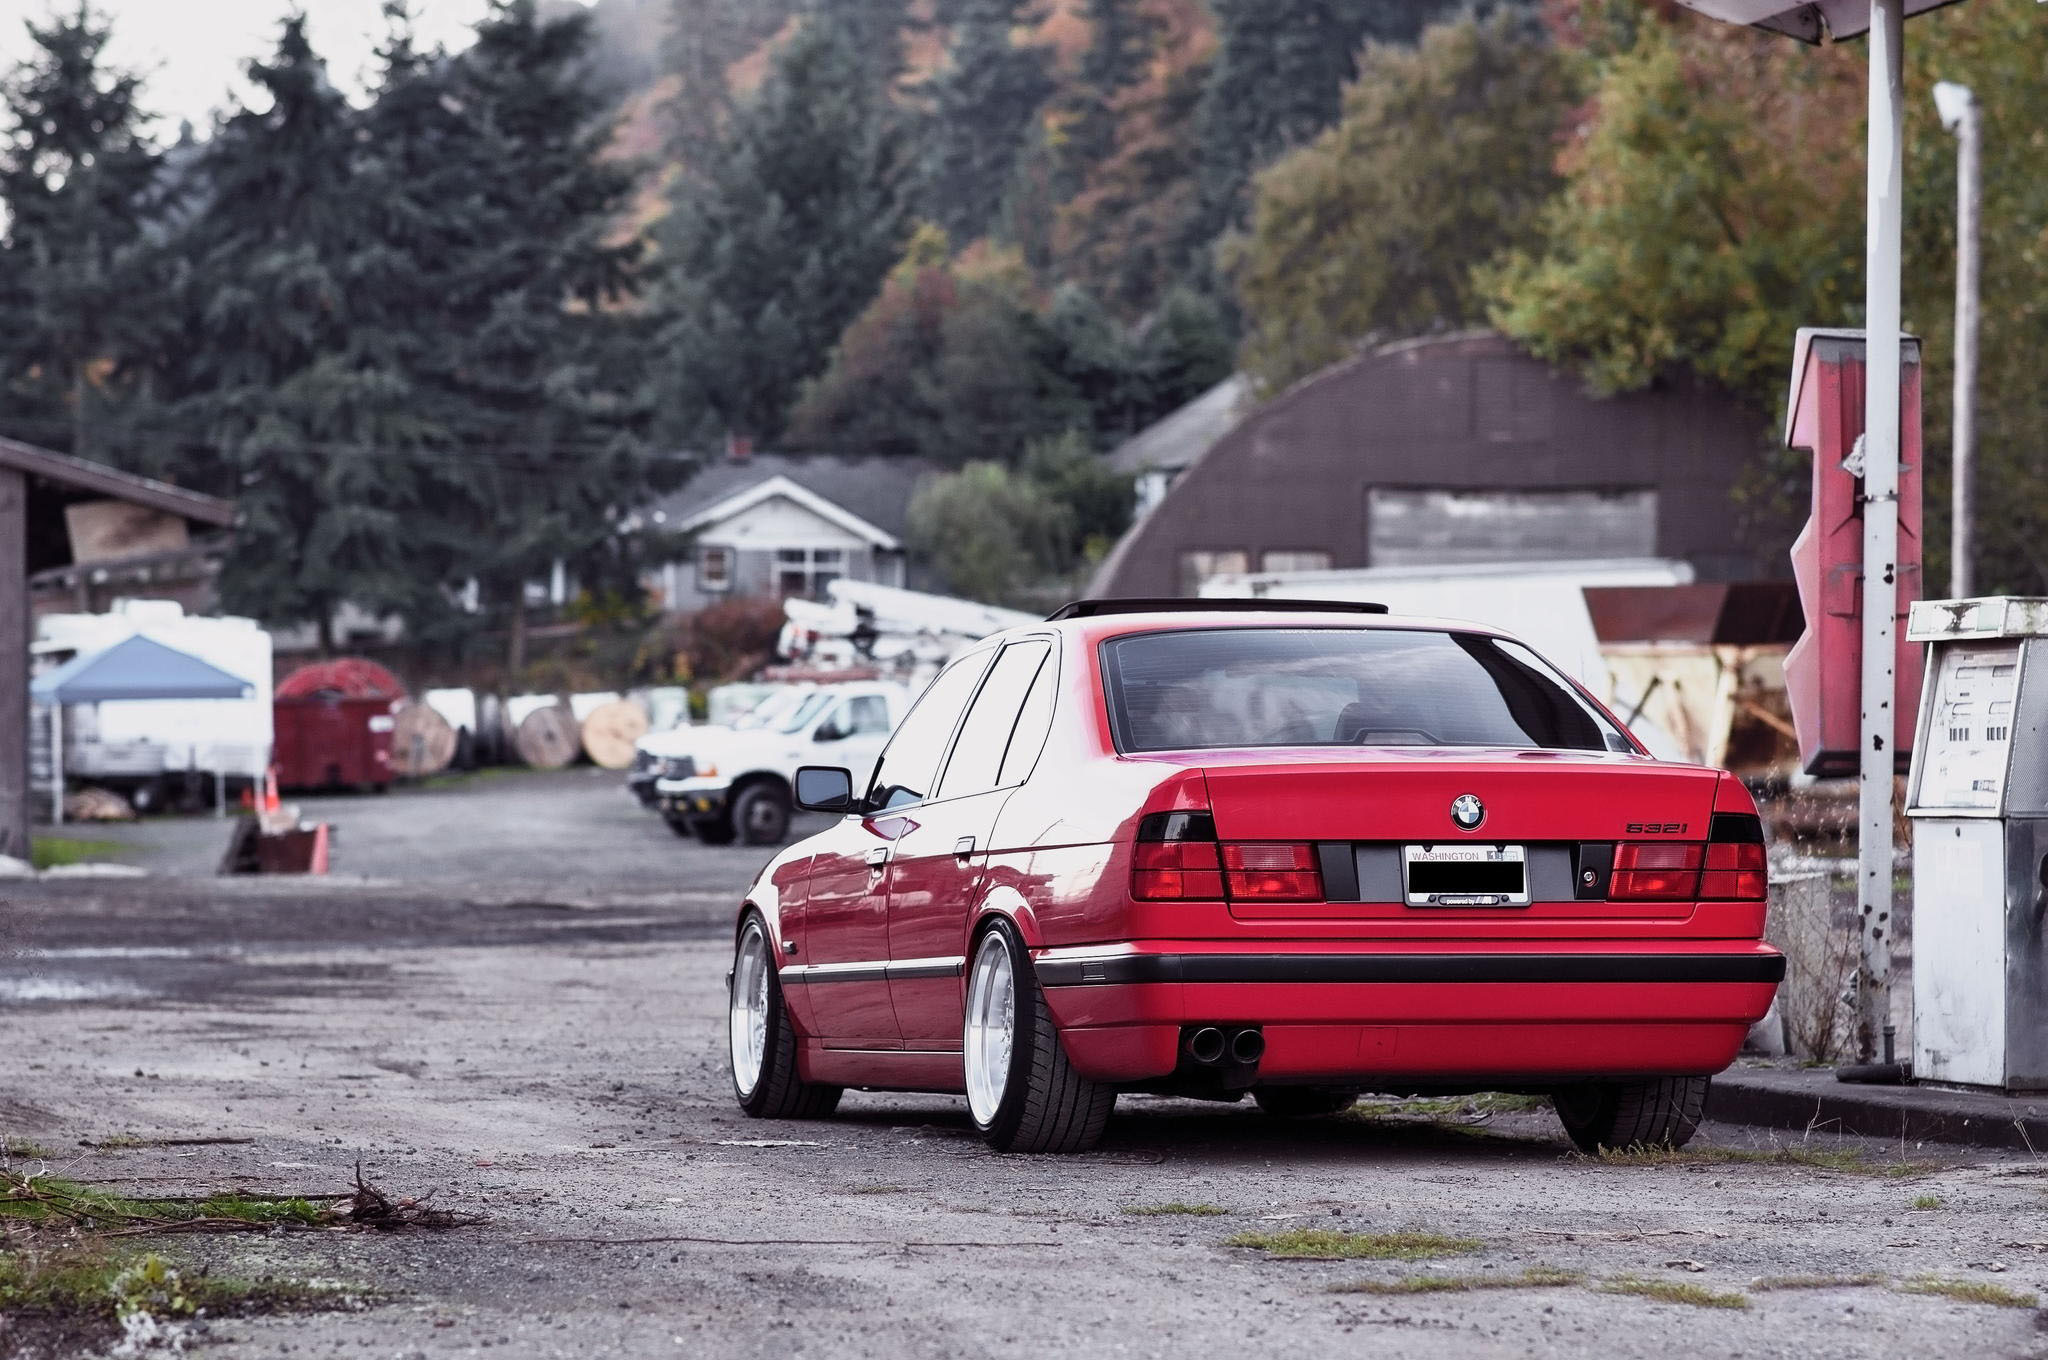 107905 download wallpaper auto, bmw, tuning, cars, red, back view, rear view, e34, 532i screensavers and pictures for free